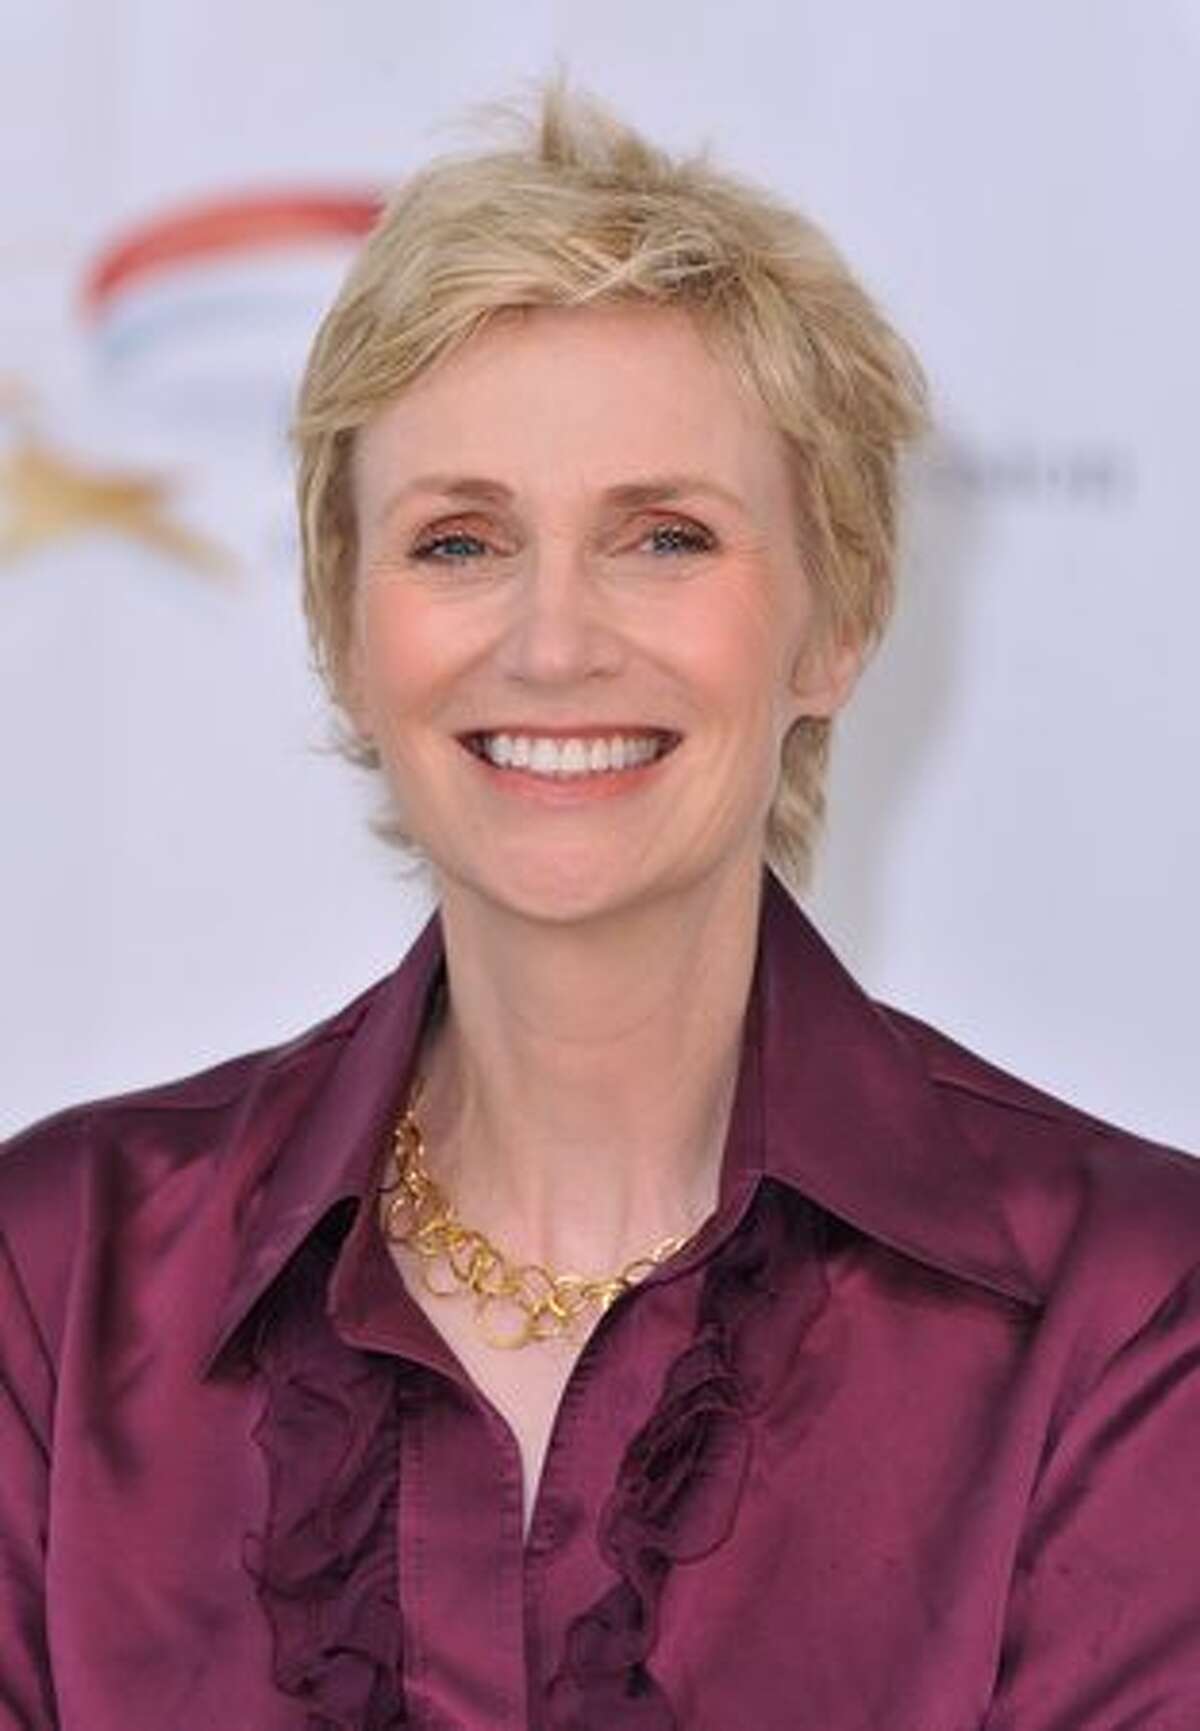 Actress Jane Lynch pose during a photocall for "Glee" TV series at Grimaldi Forum.